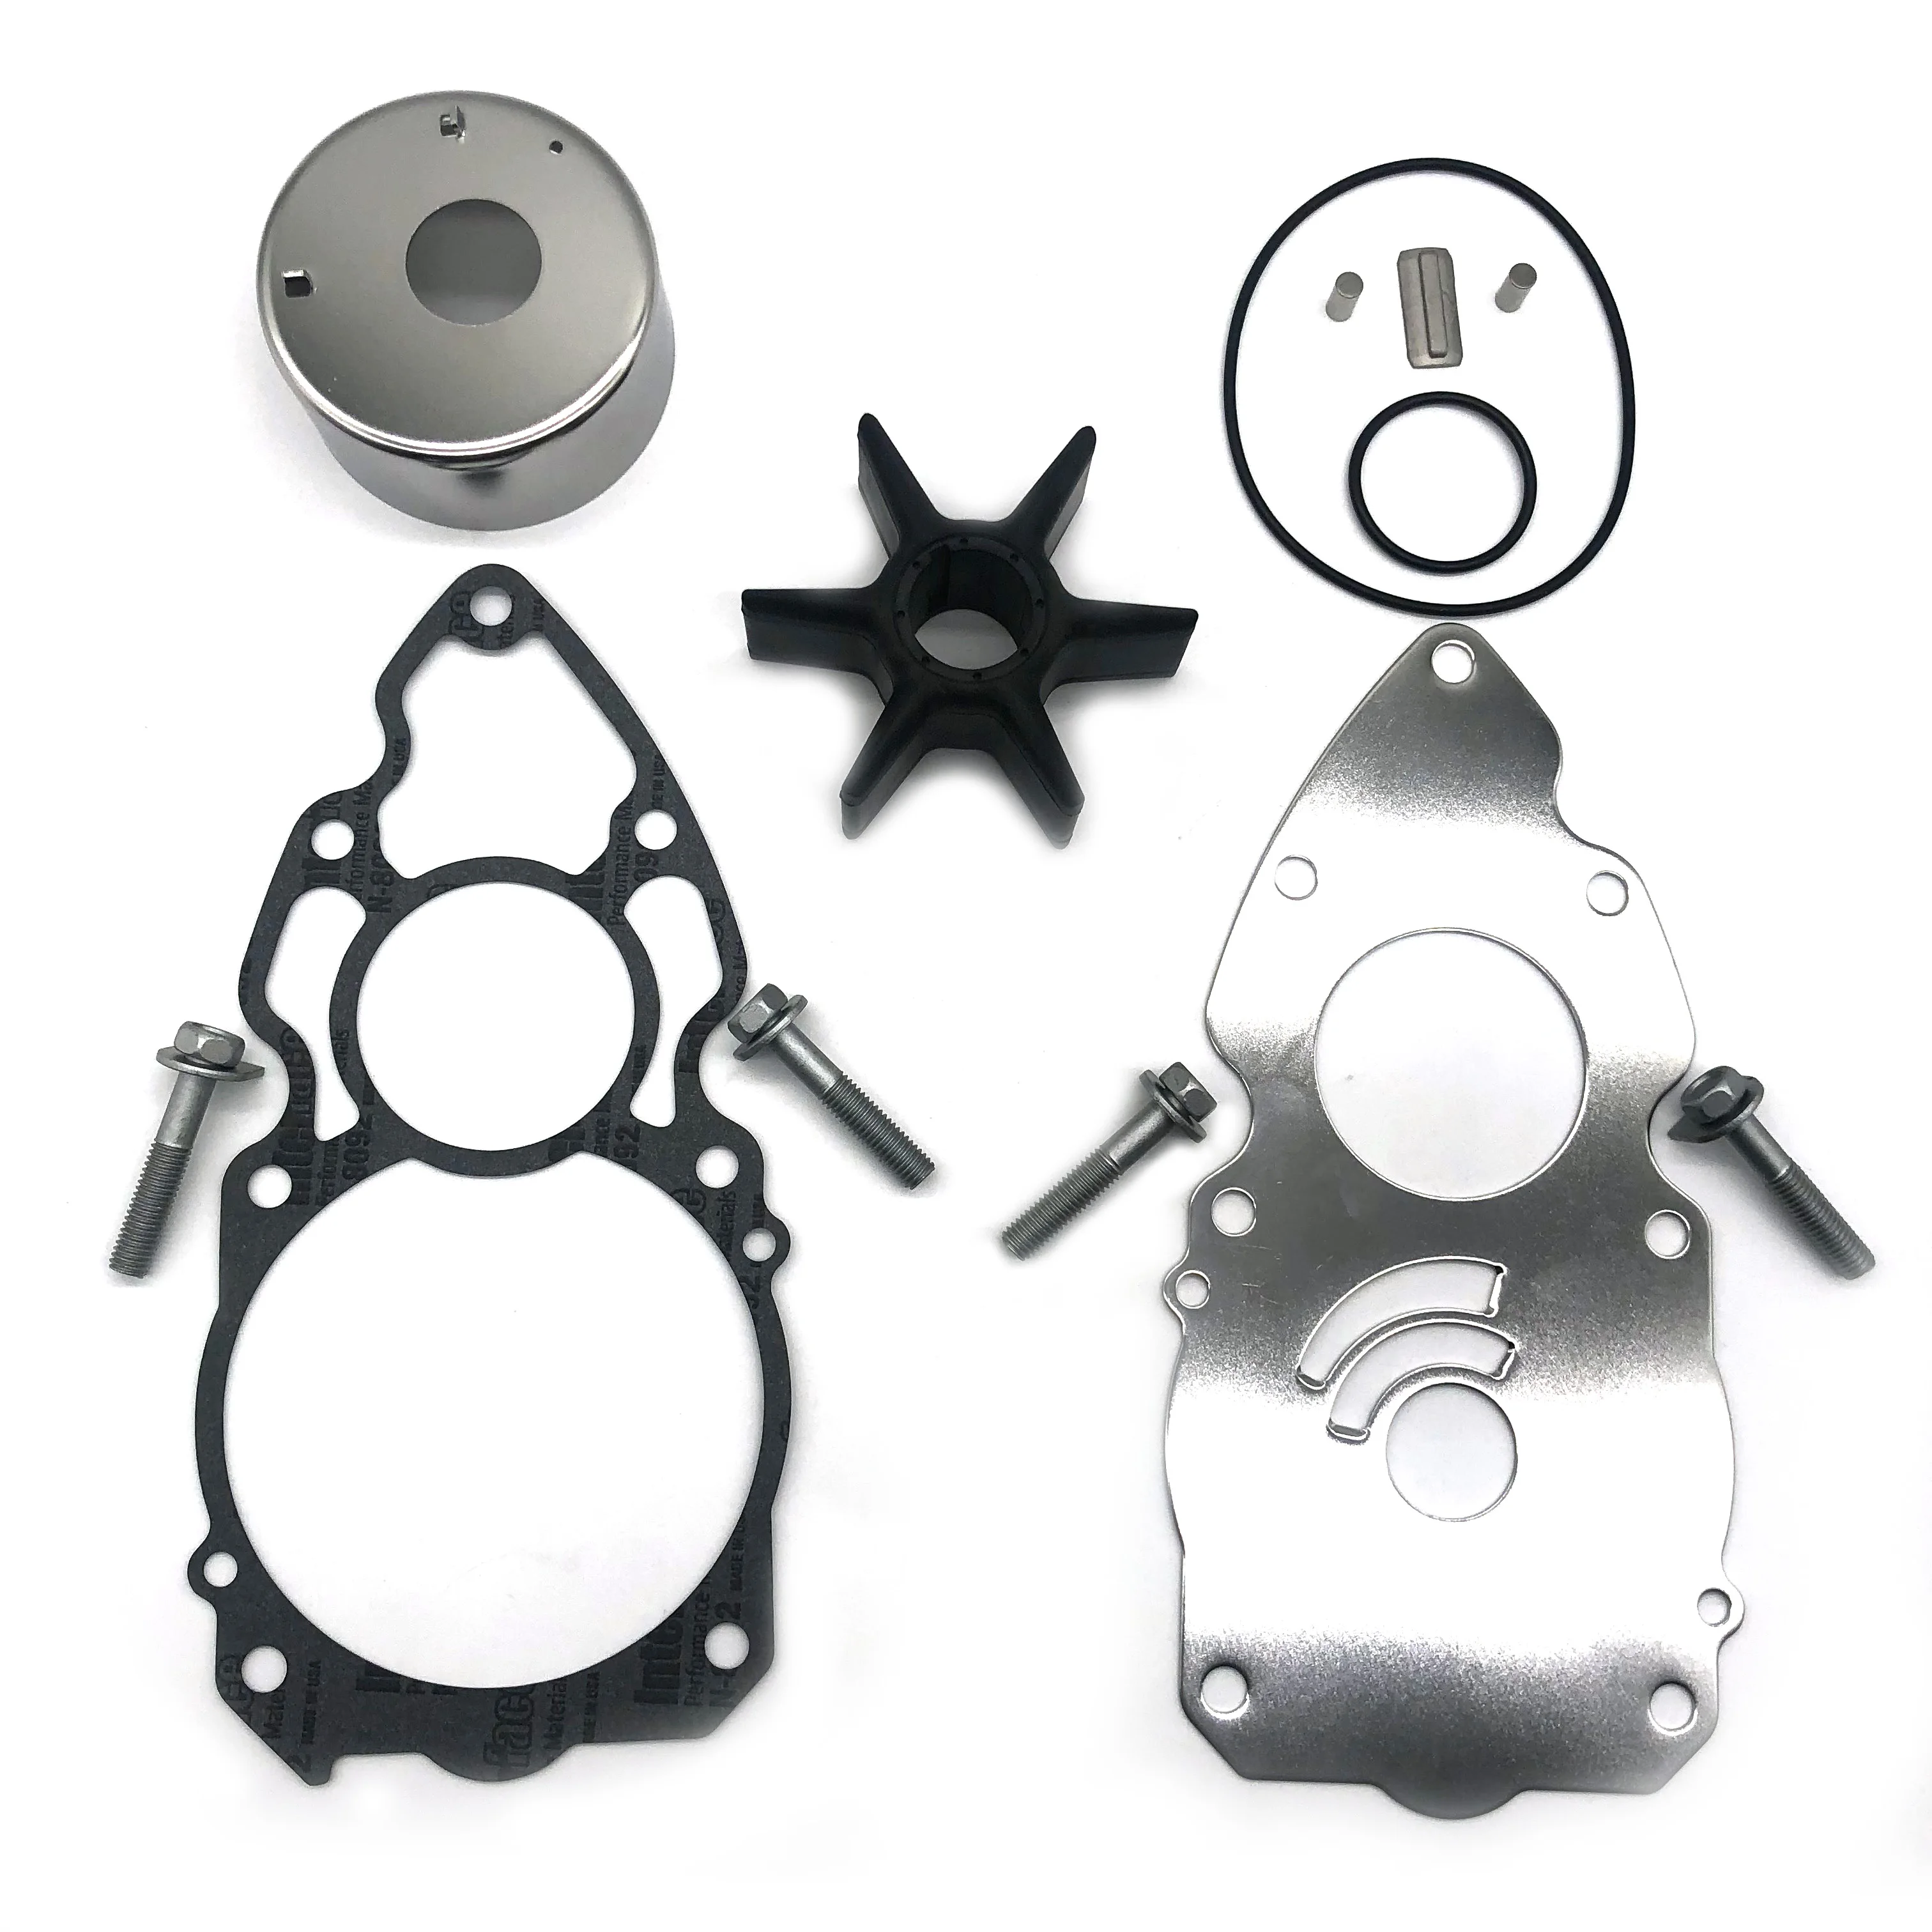 Water Pump Impeller Repair Kit for Yamaha Outboard Yamaha 6AW-W0078-00-00 Sierra 18-3477 F300/LF300/(5.3L) - 2007-2009